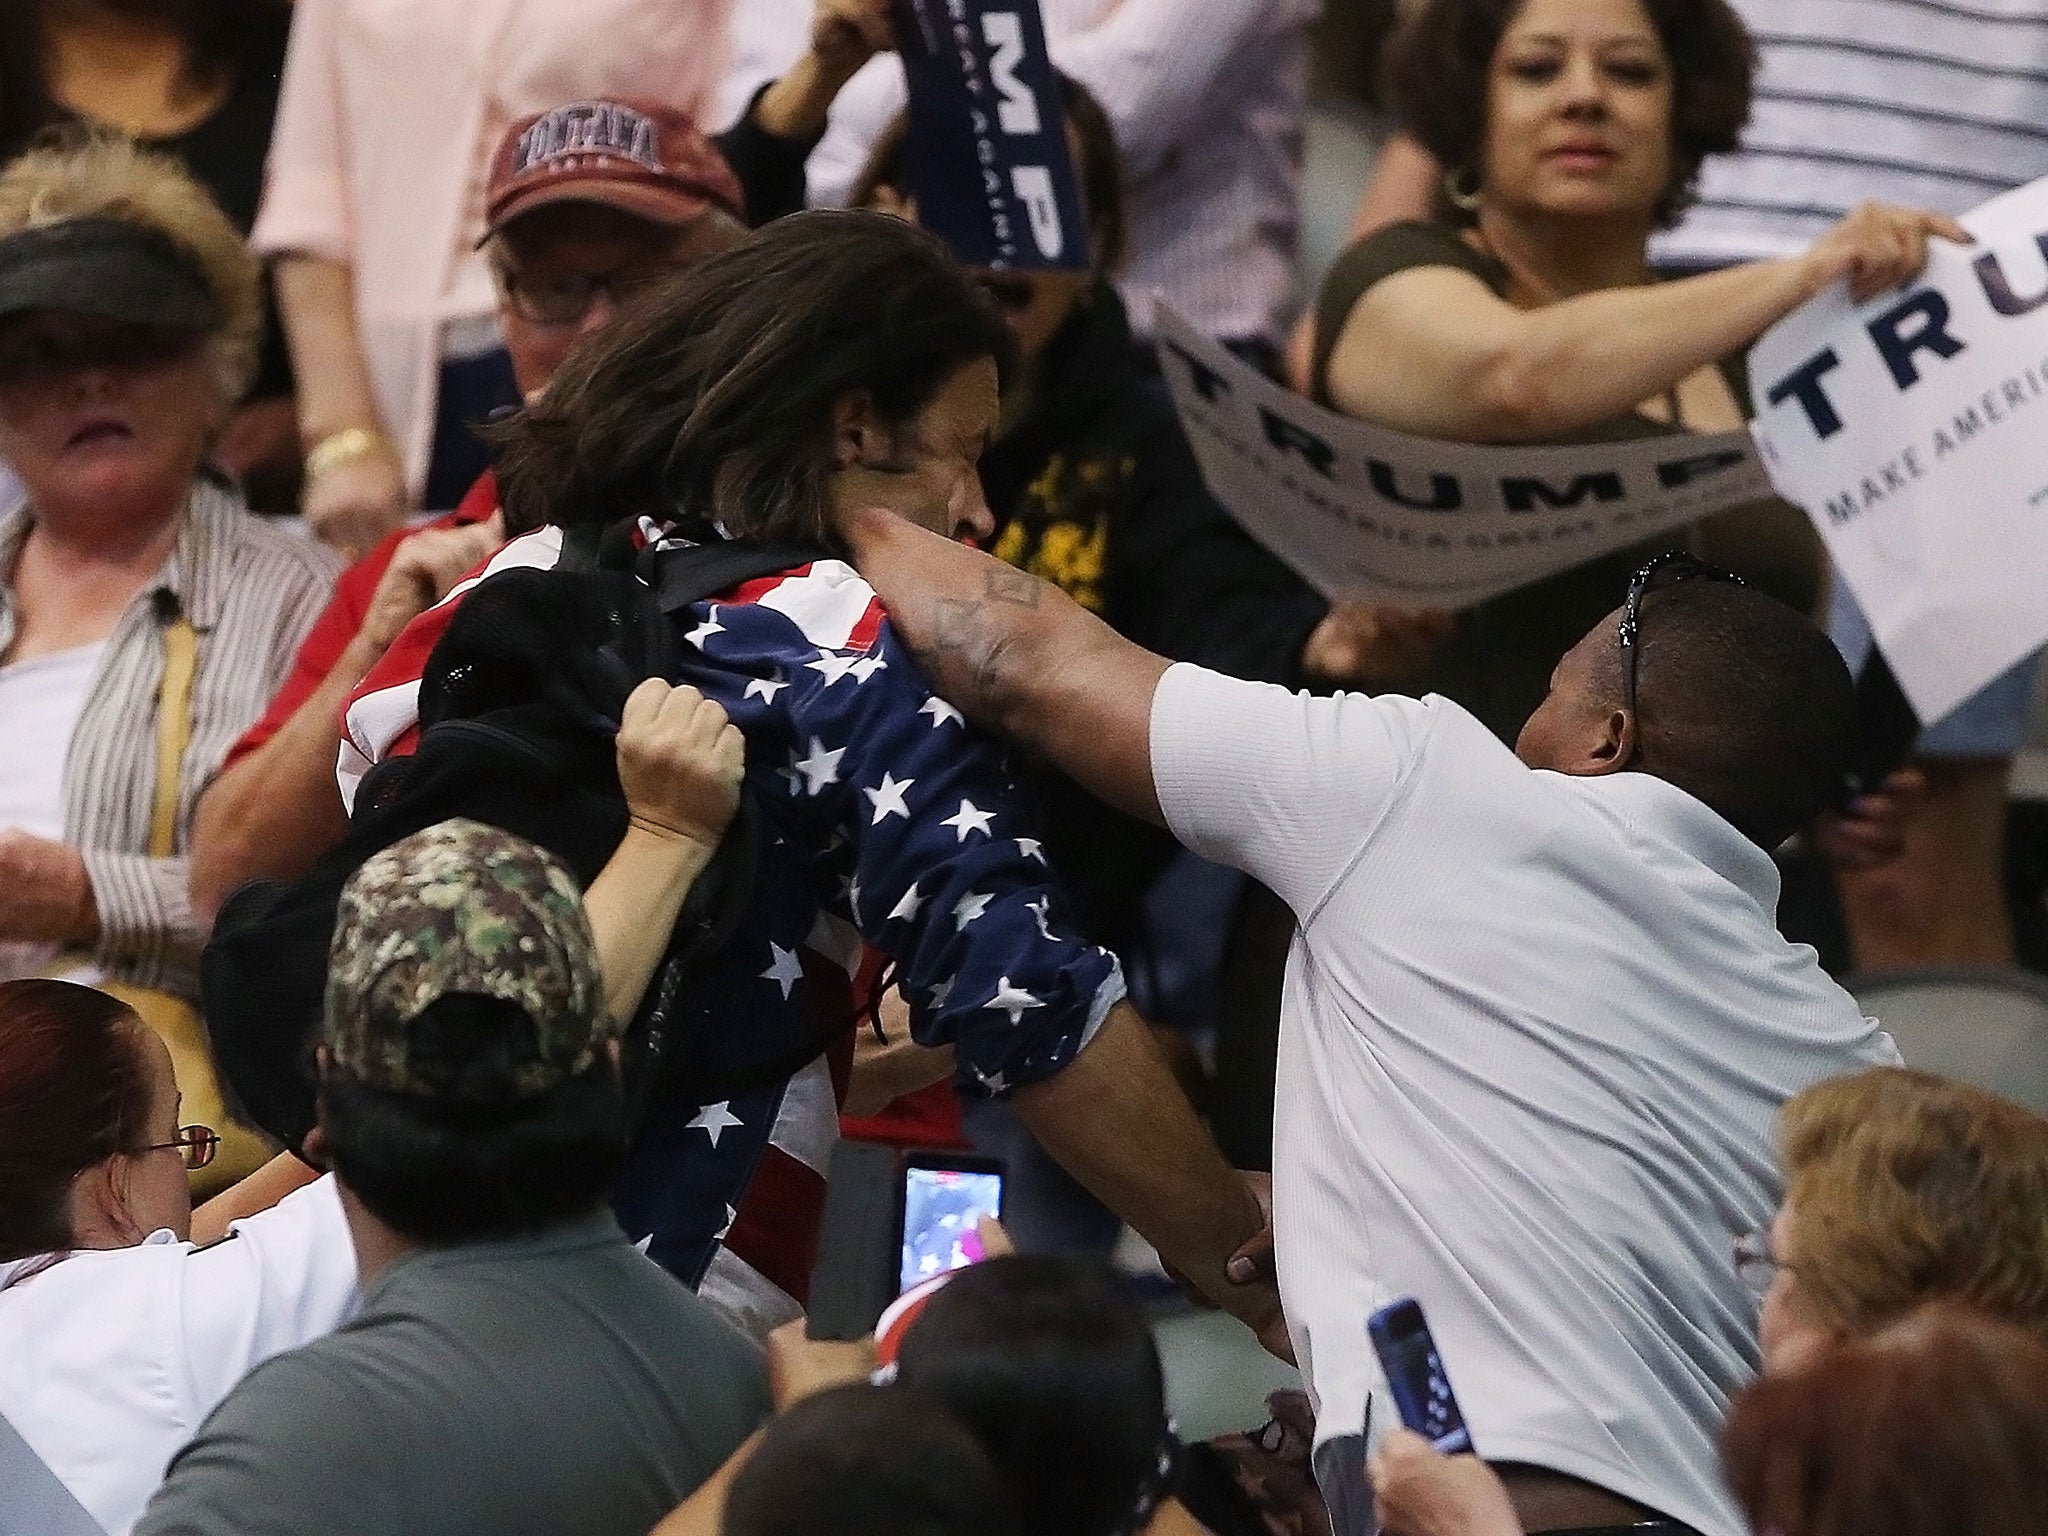 Protester Bryan Sanders, centre left, is punched by a Trump supporter as he is escorted out of a rally in Tucson